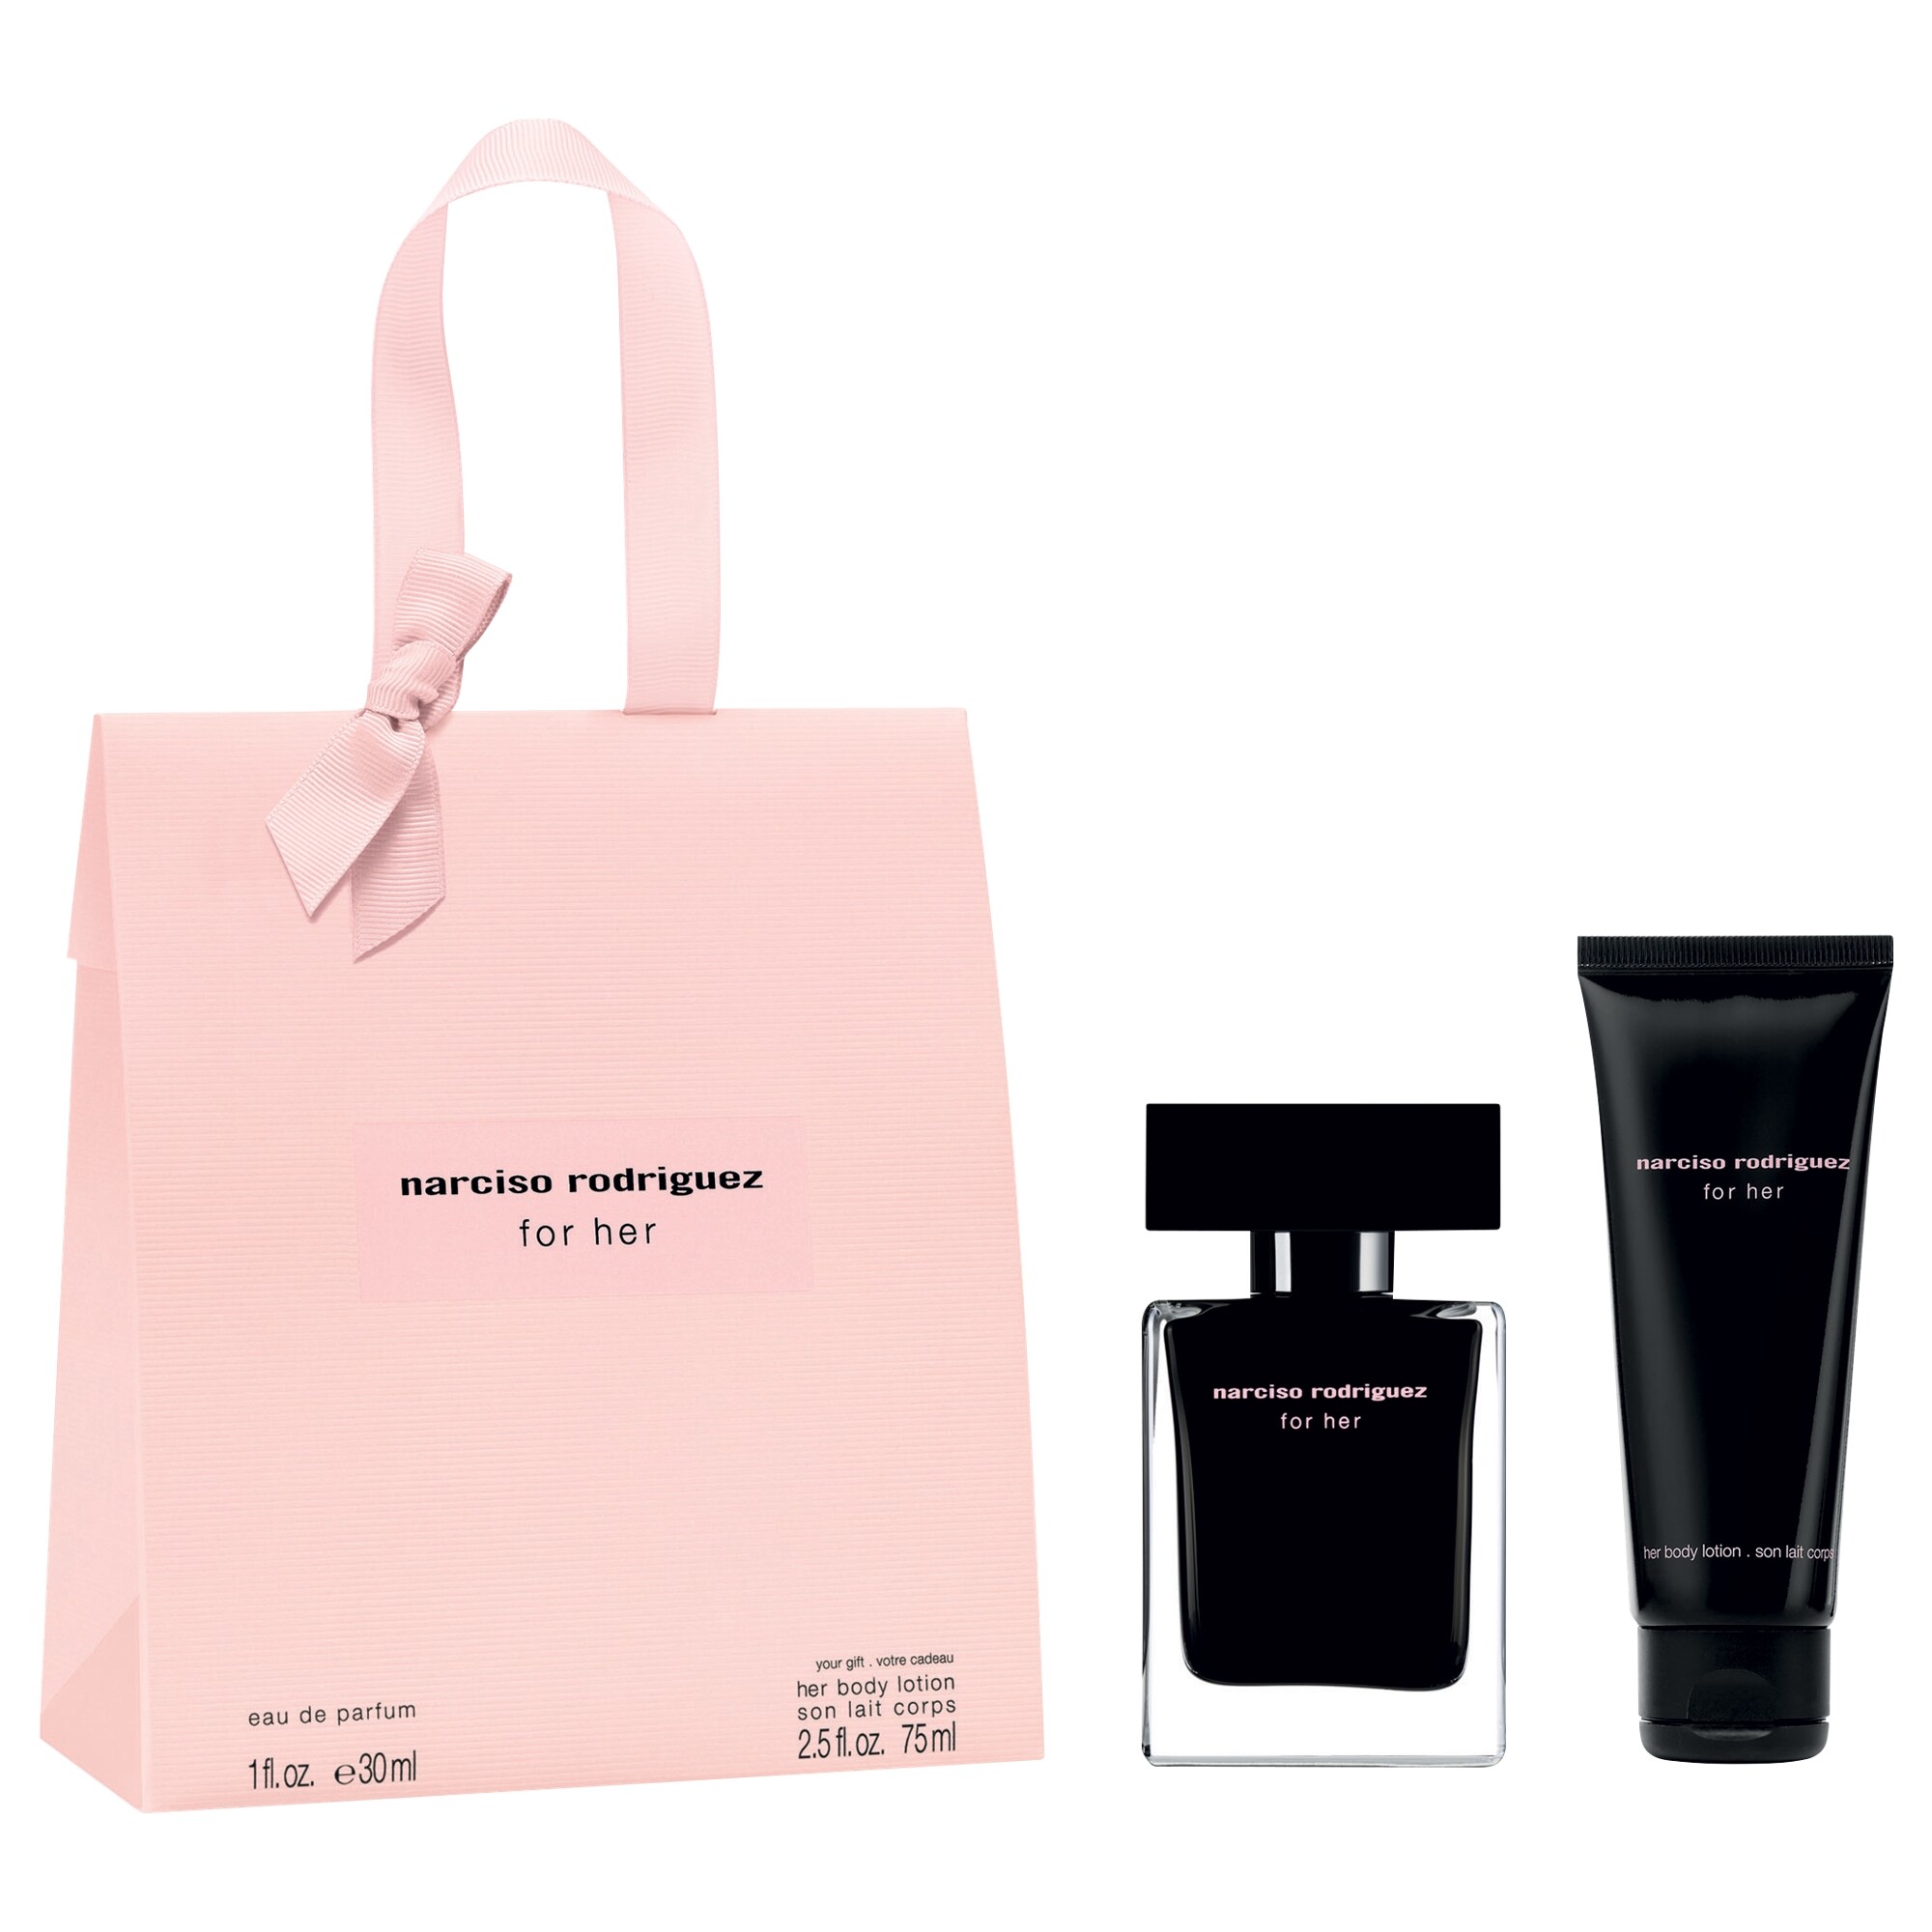 Narciso Rodriguez Narciso Rodriguez for her Set 30ml kaufen